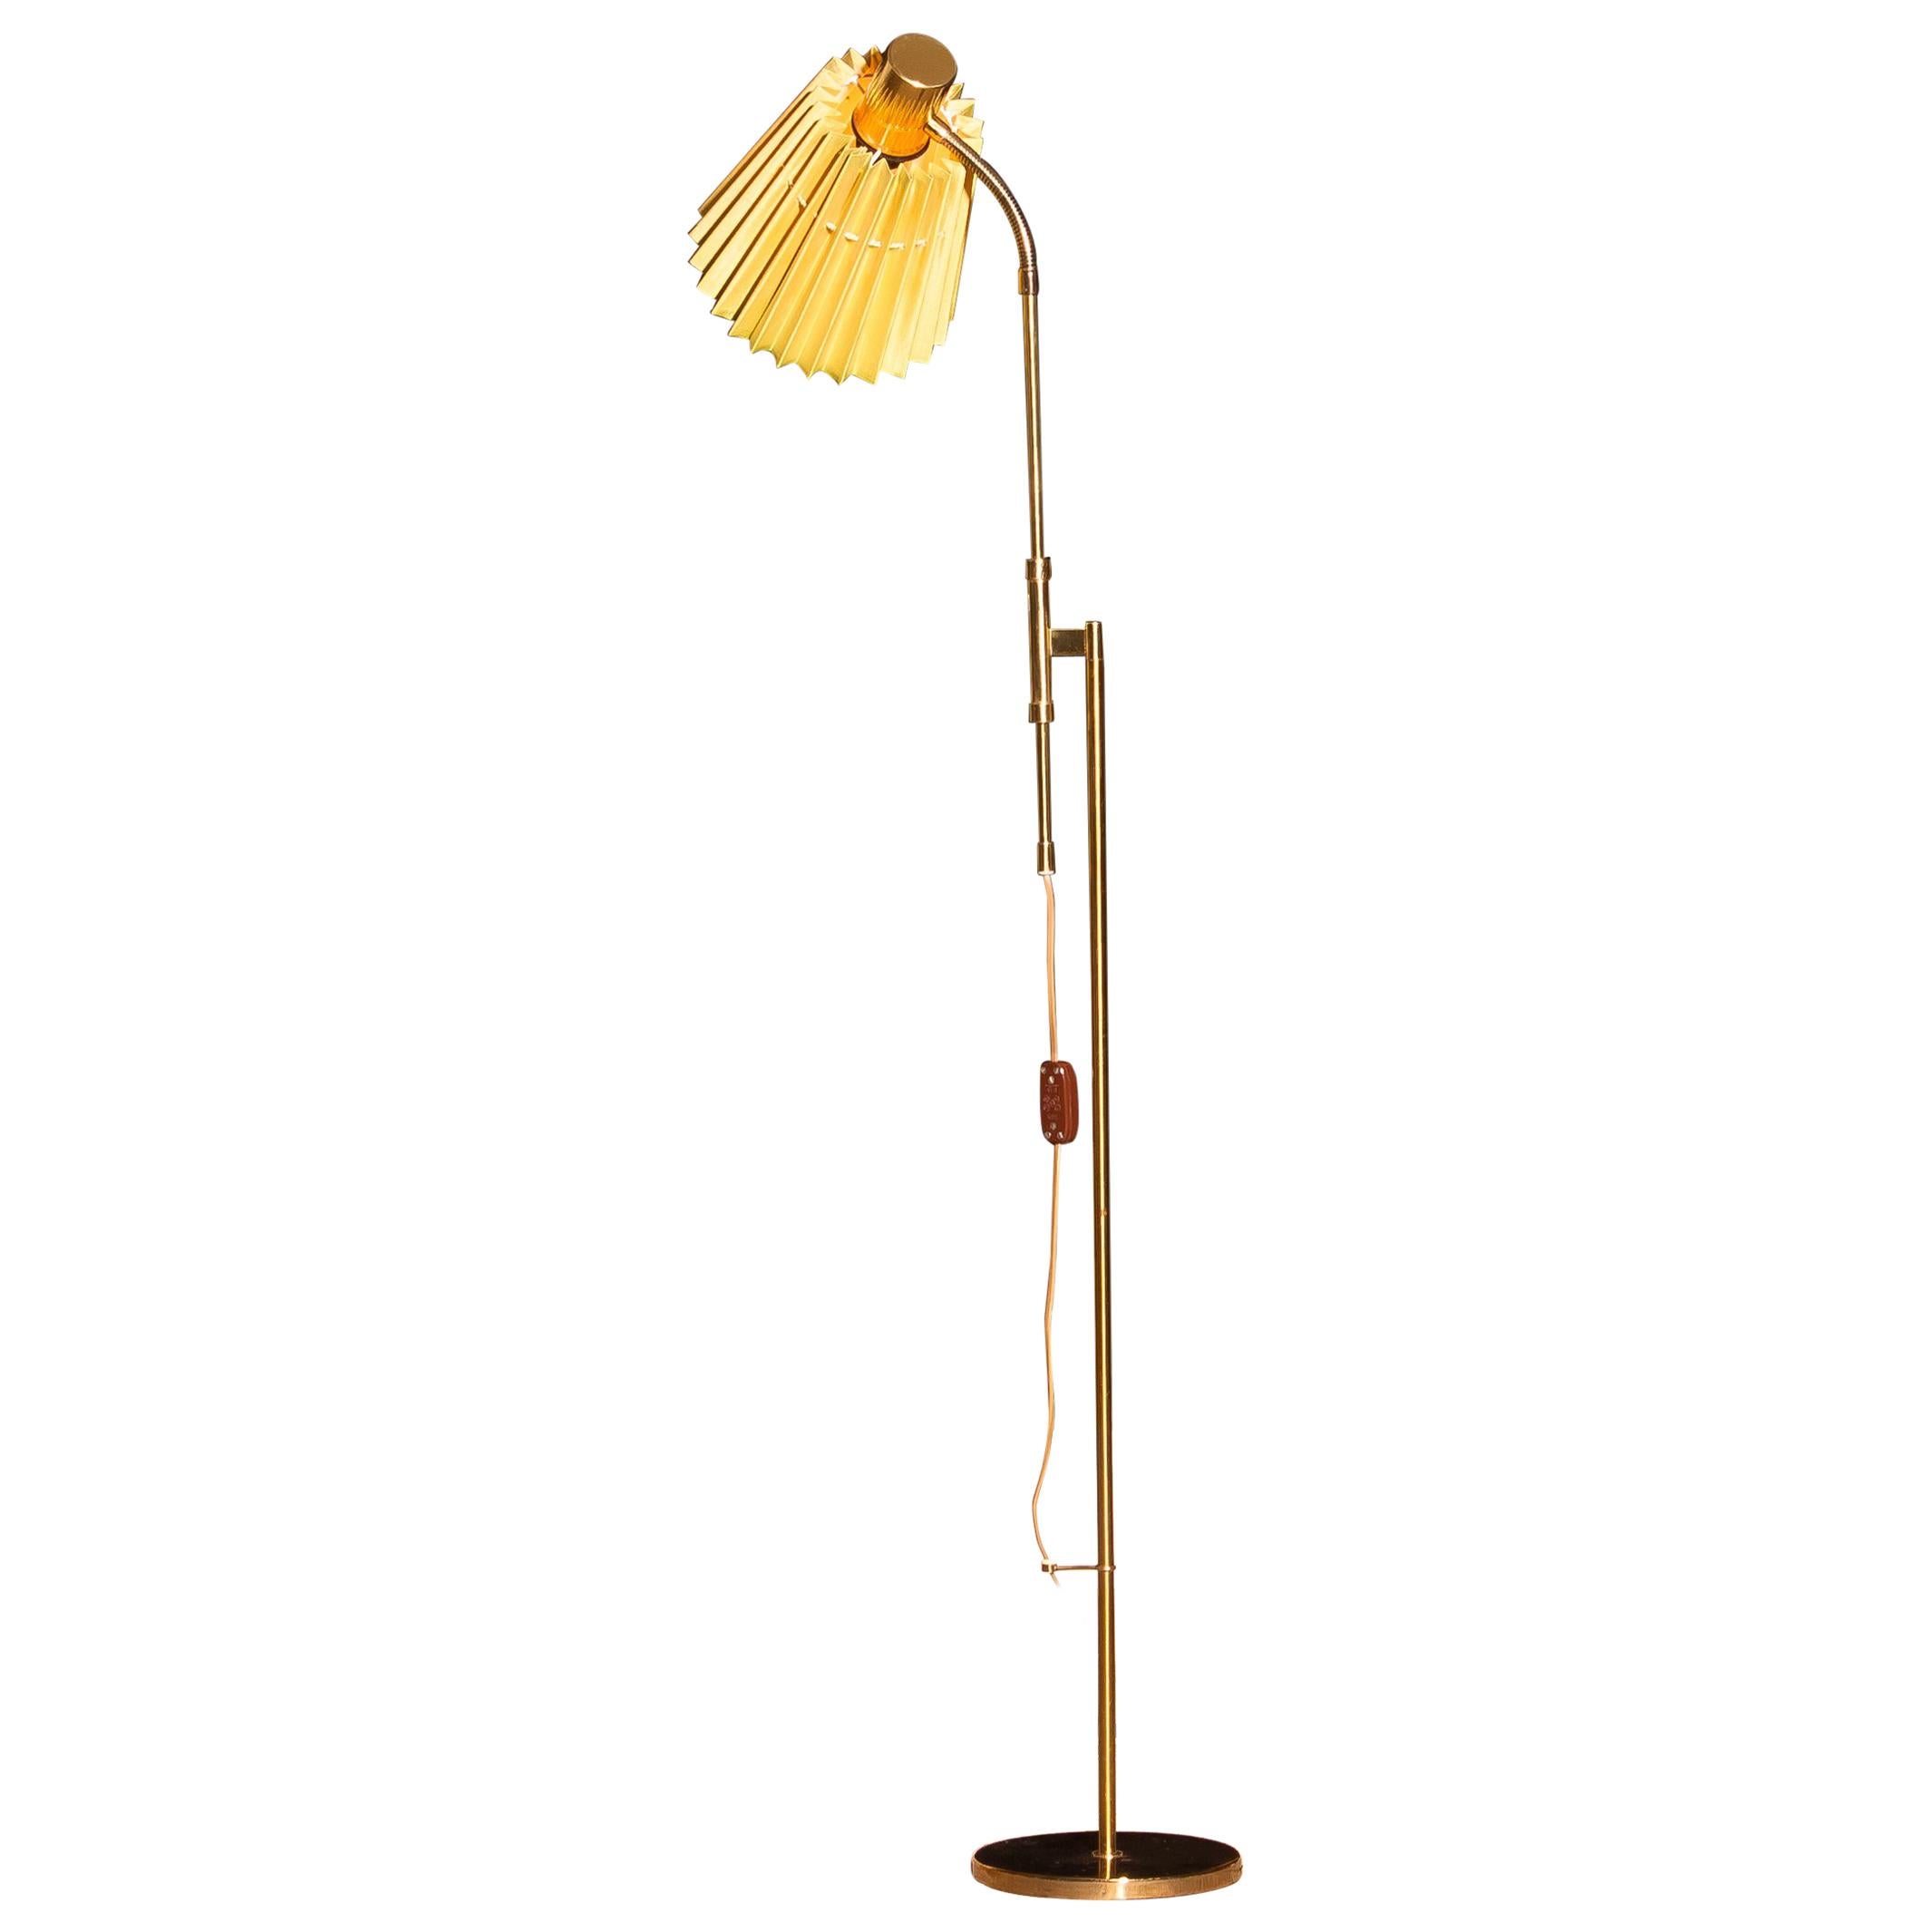 Adjustable brass floor lamp by Möllers Armaturfabrik, Sweden. 
It's in perfect condition and technically 100%. 
Wired for 110 and 220 volts.
Period 1950.
Measures: Height is adjustable between 115 and 145 cm.
The shade is ø 20 cm.